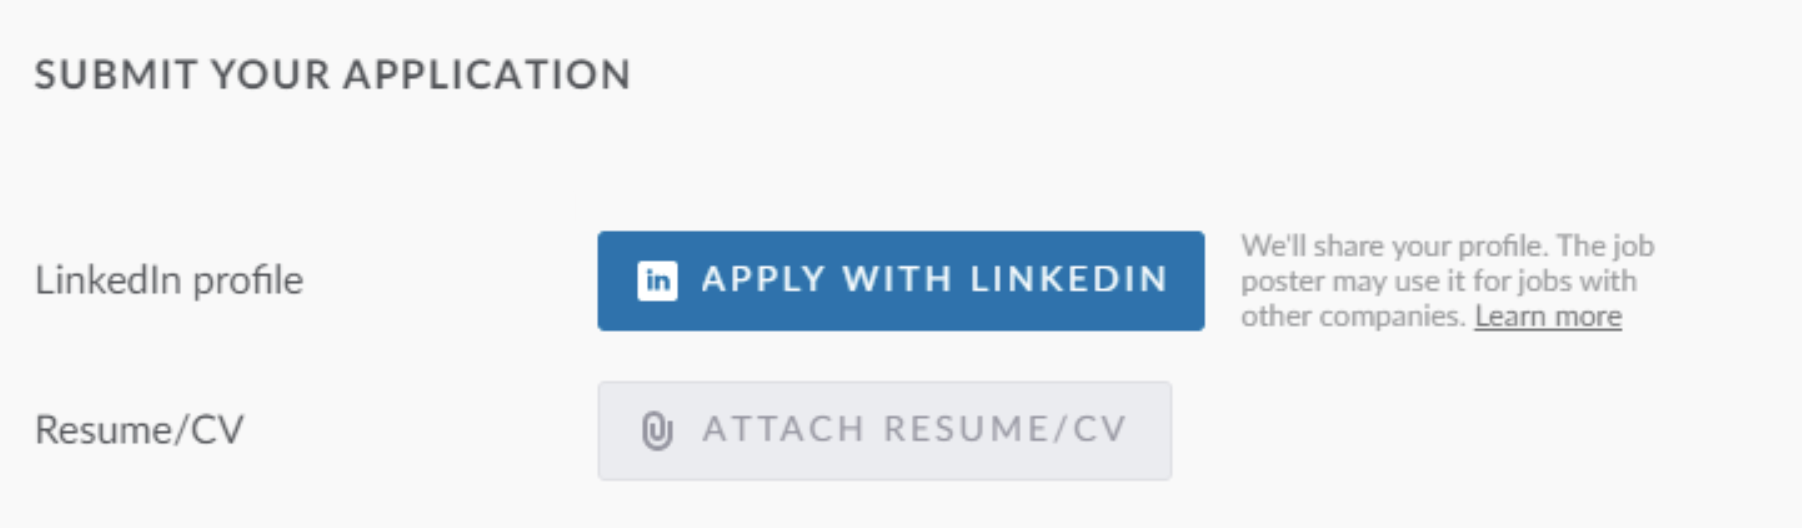 Close up candidate view of application with Apply with LinkedIn button in LinkedIn profile field. Text next to button reads 'We'll share your profile. The job poster may use it for jobs with other companies.'